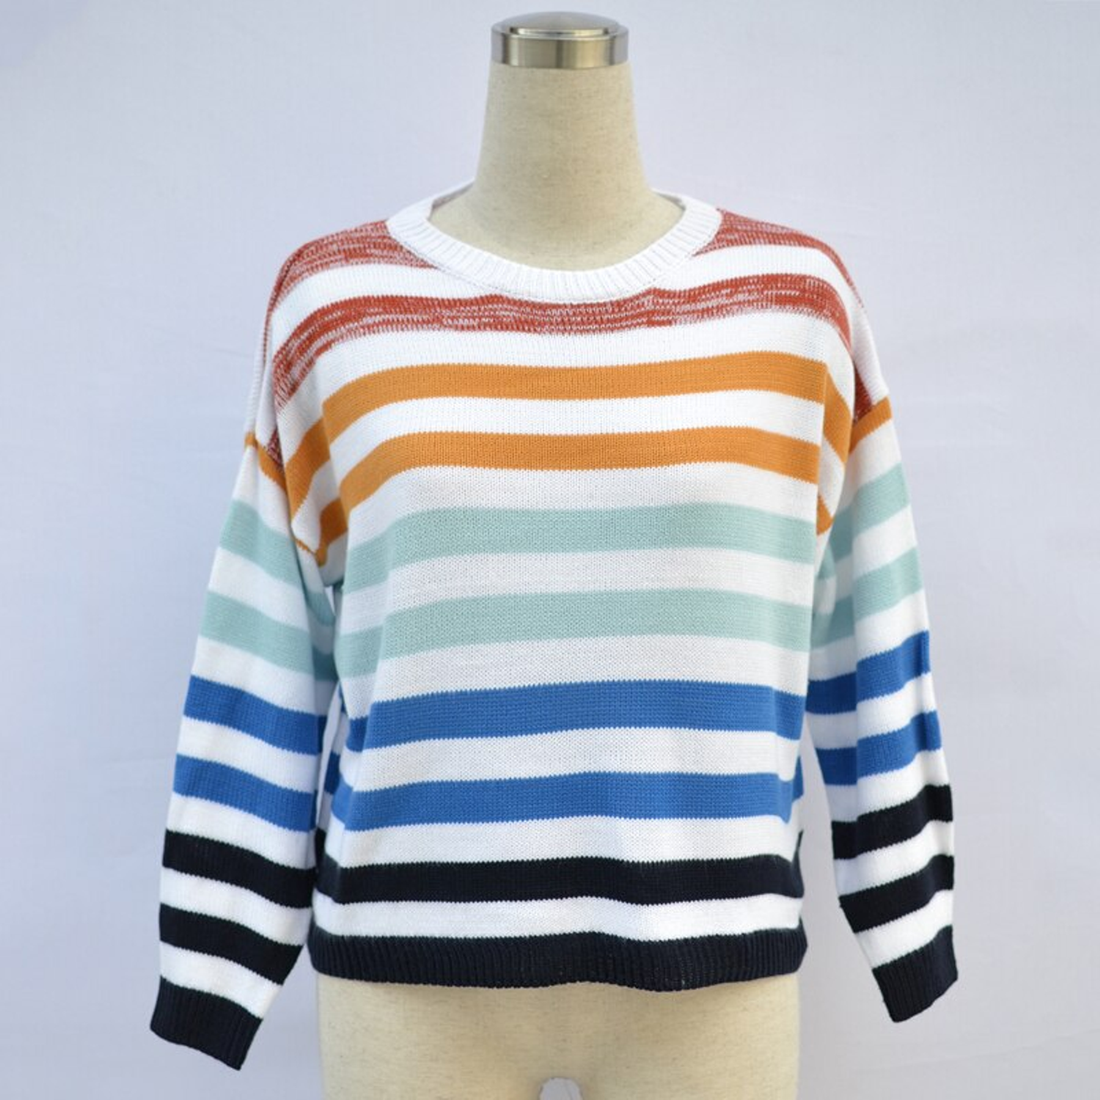 Women's Autumn/Winter Knitted Striped O-Neck Sweater